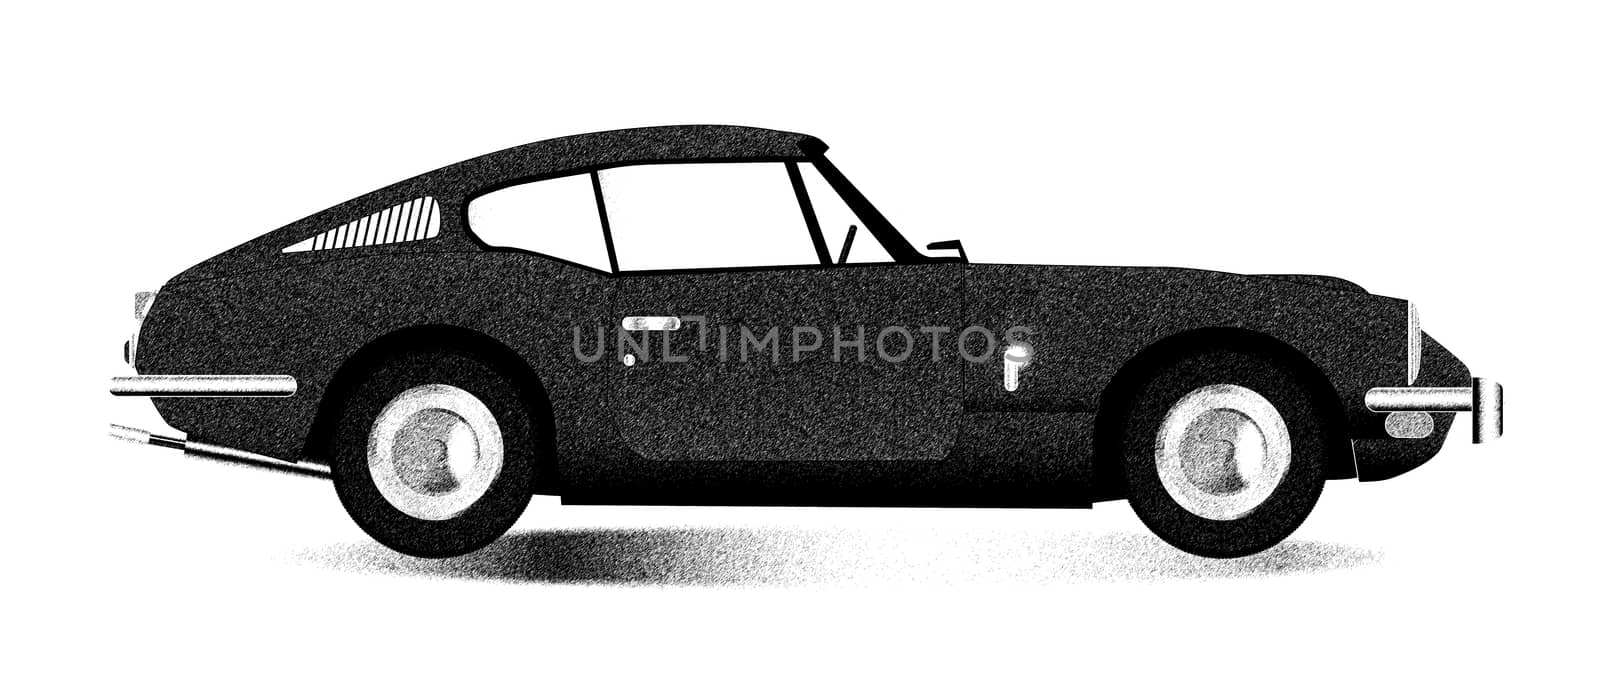 A classic old British hard top sports car sketch over a white background